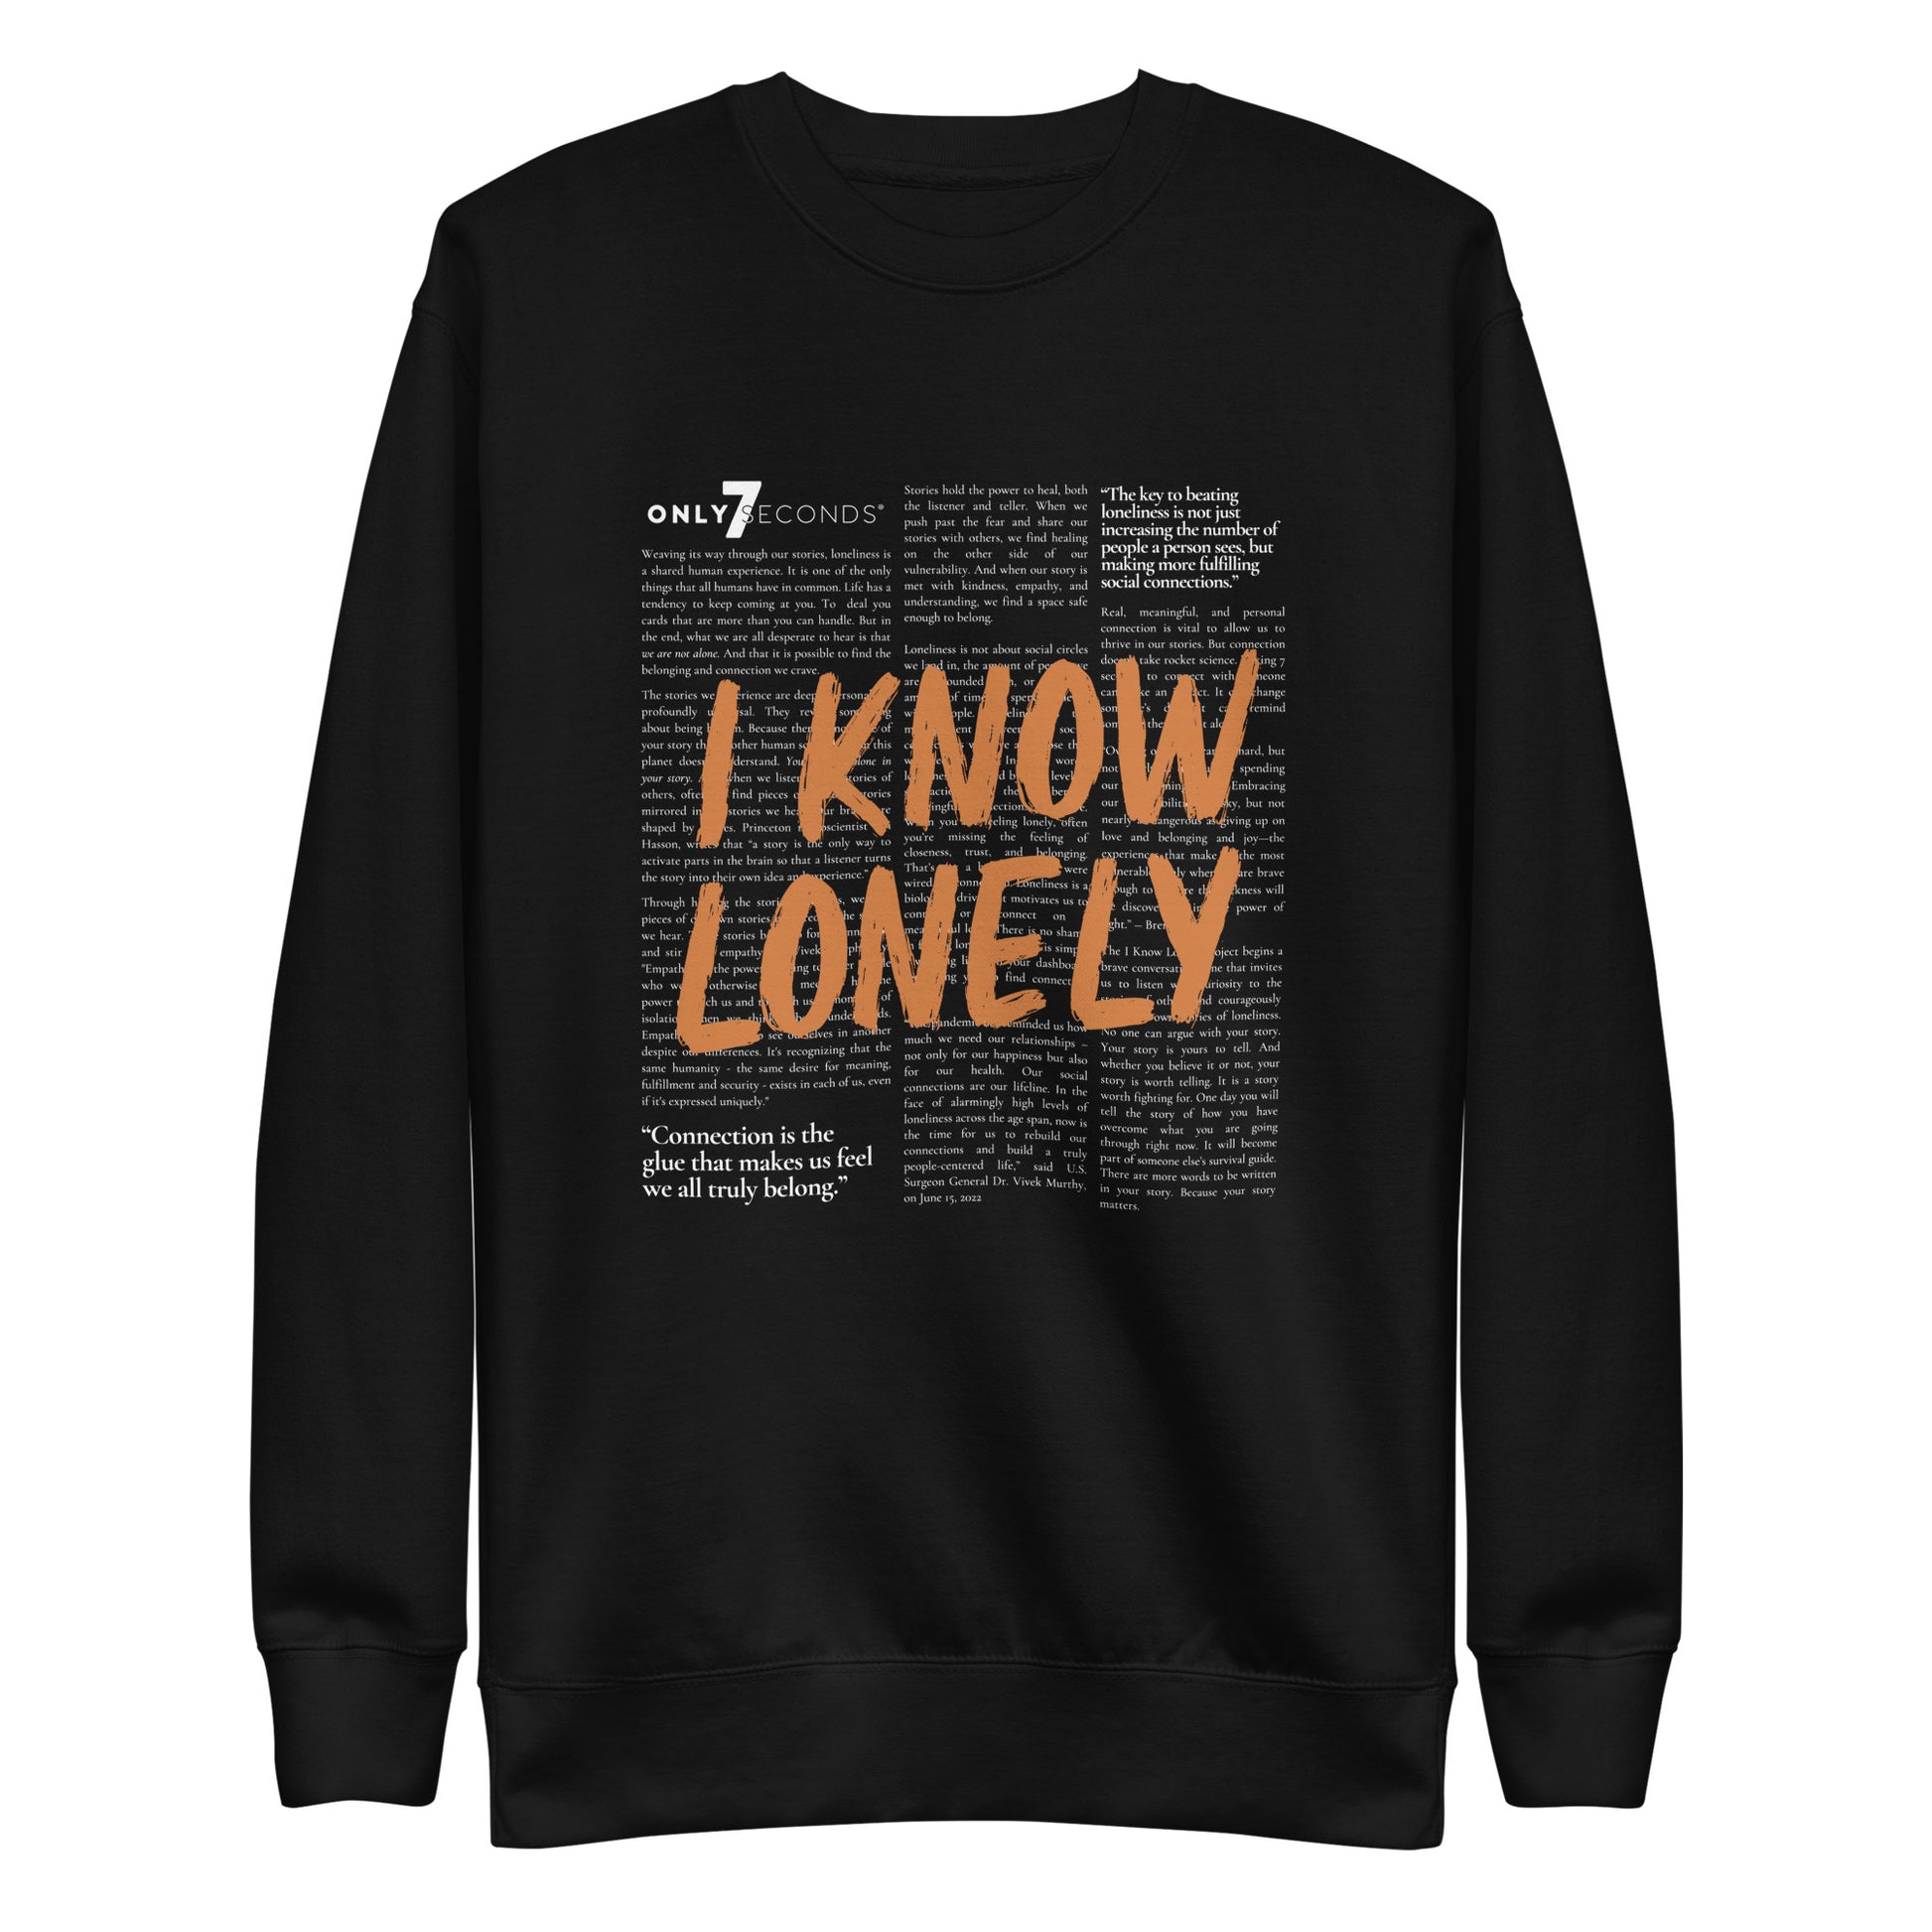 I Know Lonely: Crewneck Sweatshirt - Only7Seconds Shop